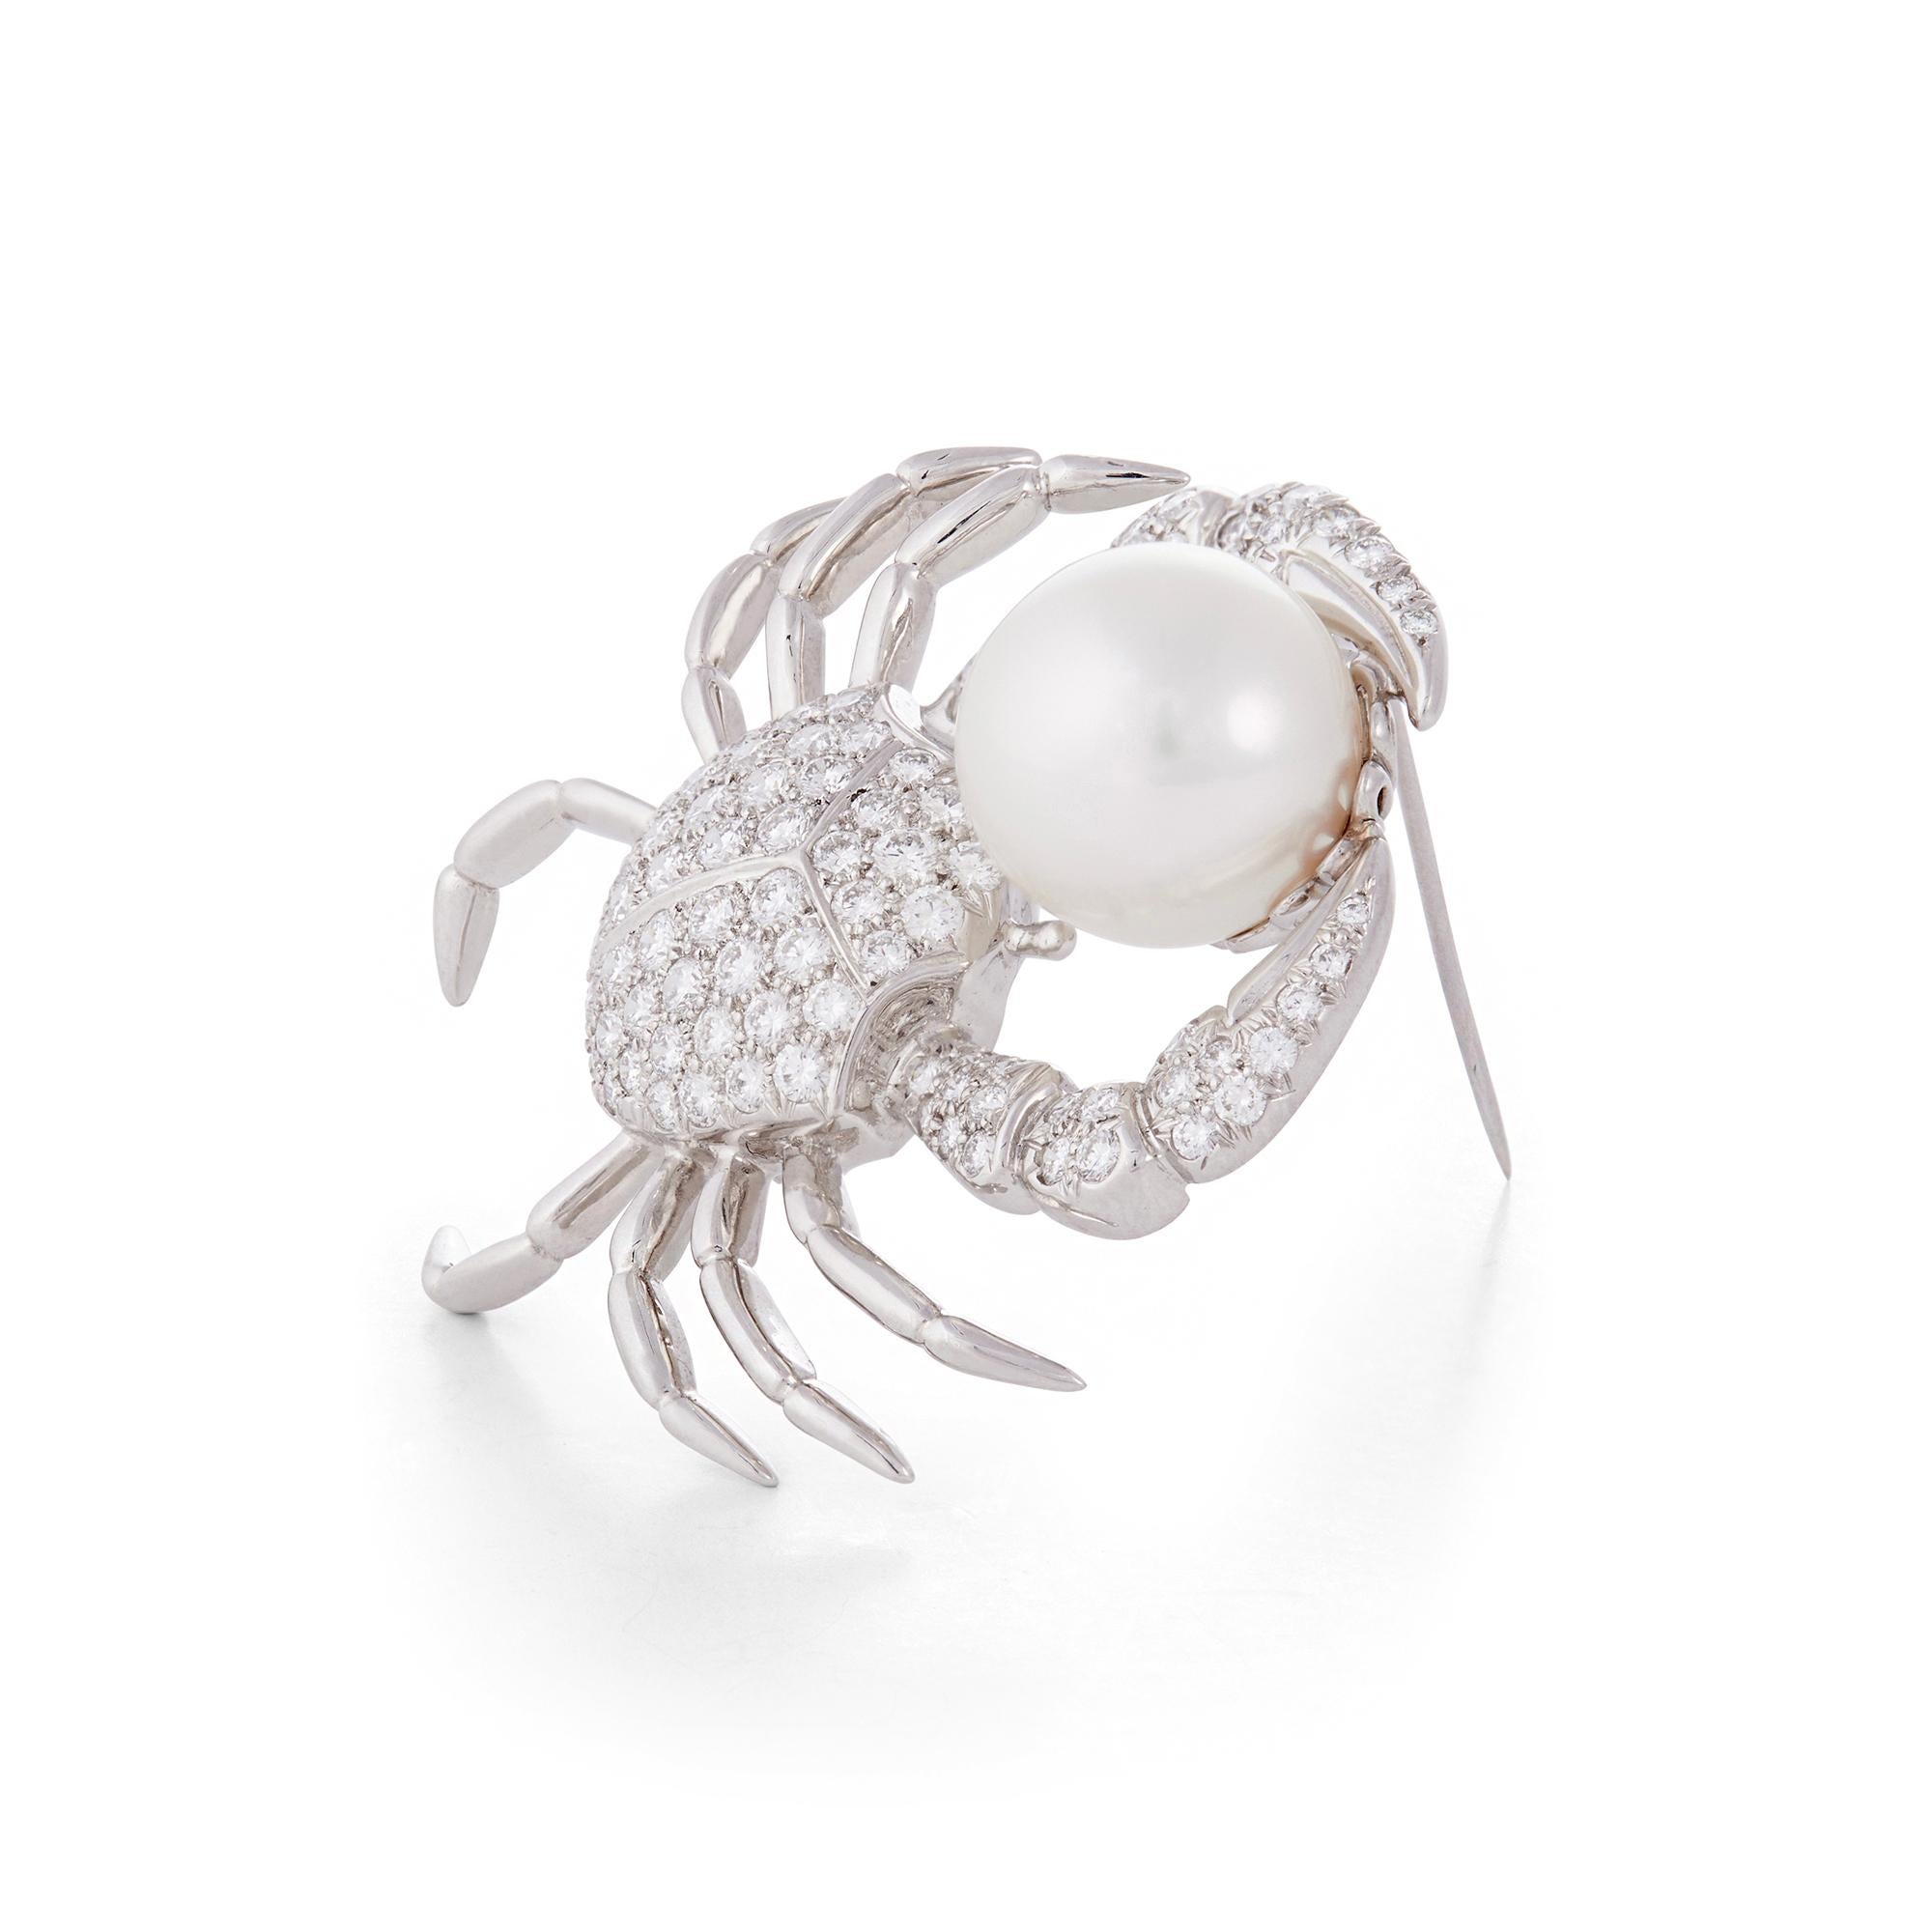 Authentic Tiffany & Co. brooch crafted in platinum to resemble a crab. The body is pave-set with high-quality round brilliant cut diamonds weighing an estimated 2.7 carats, and it is enhanced by a white cultured pearl with a diameter of around 14.3